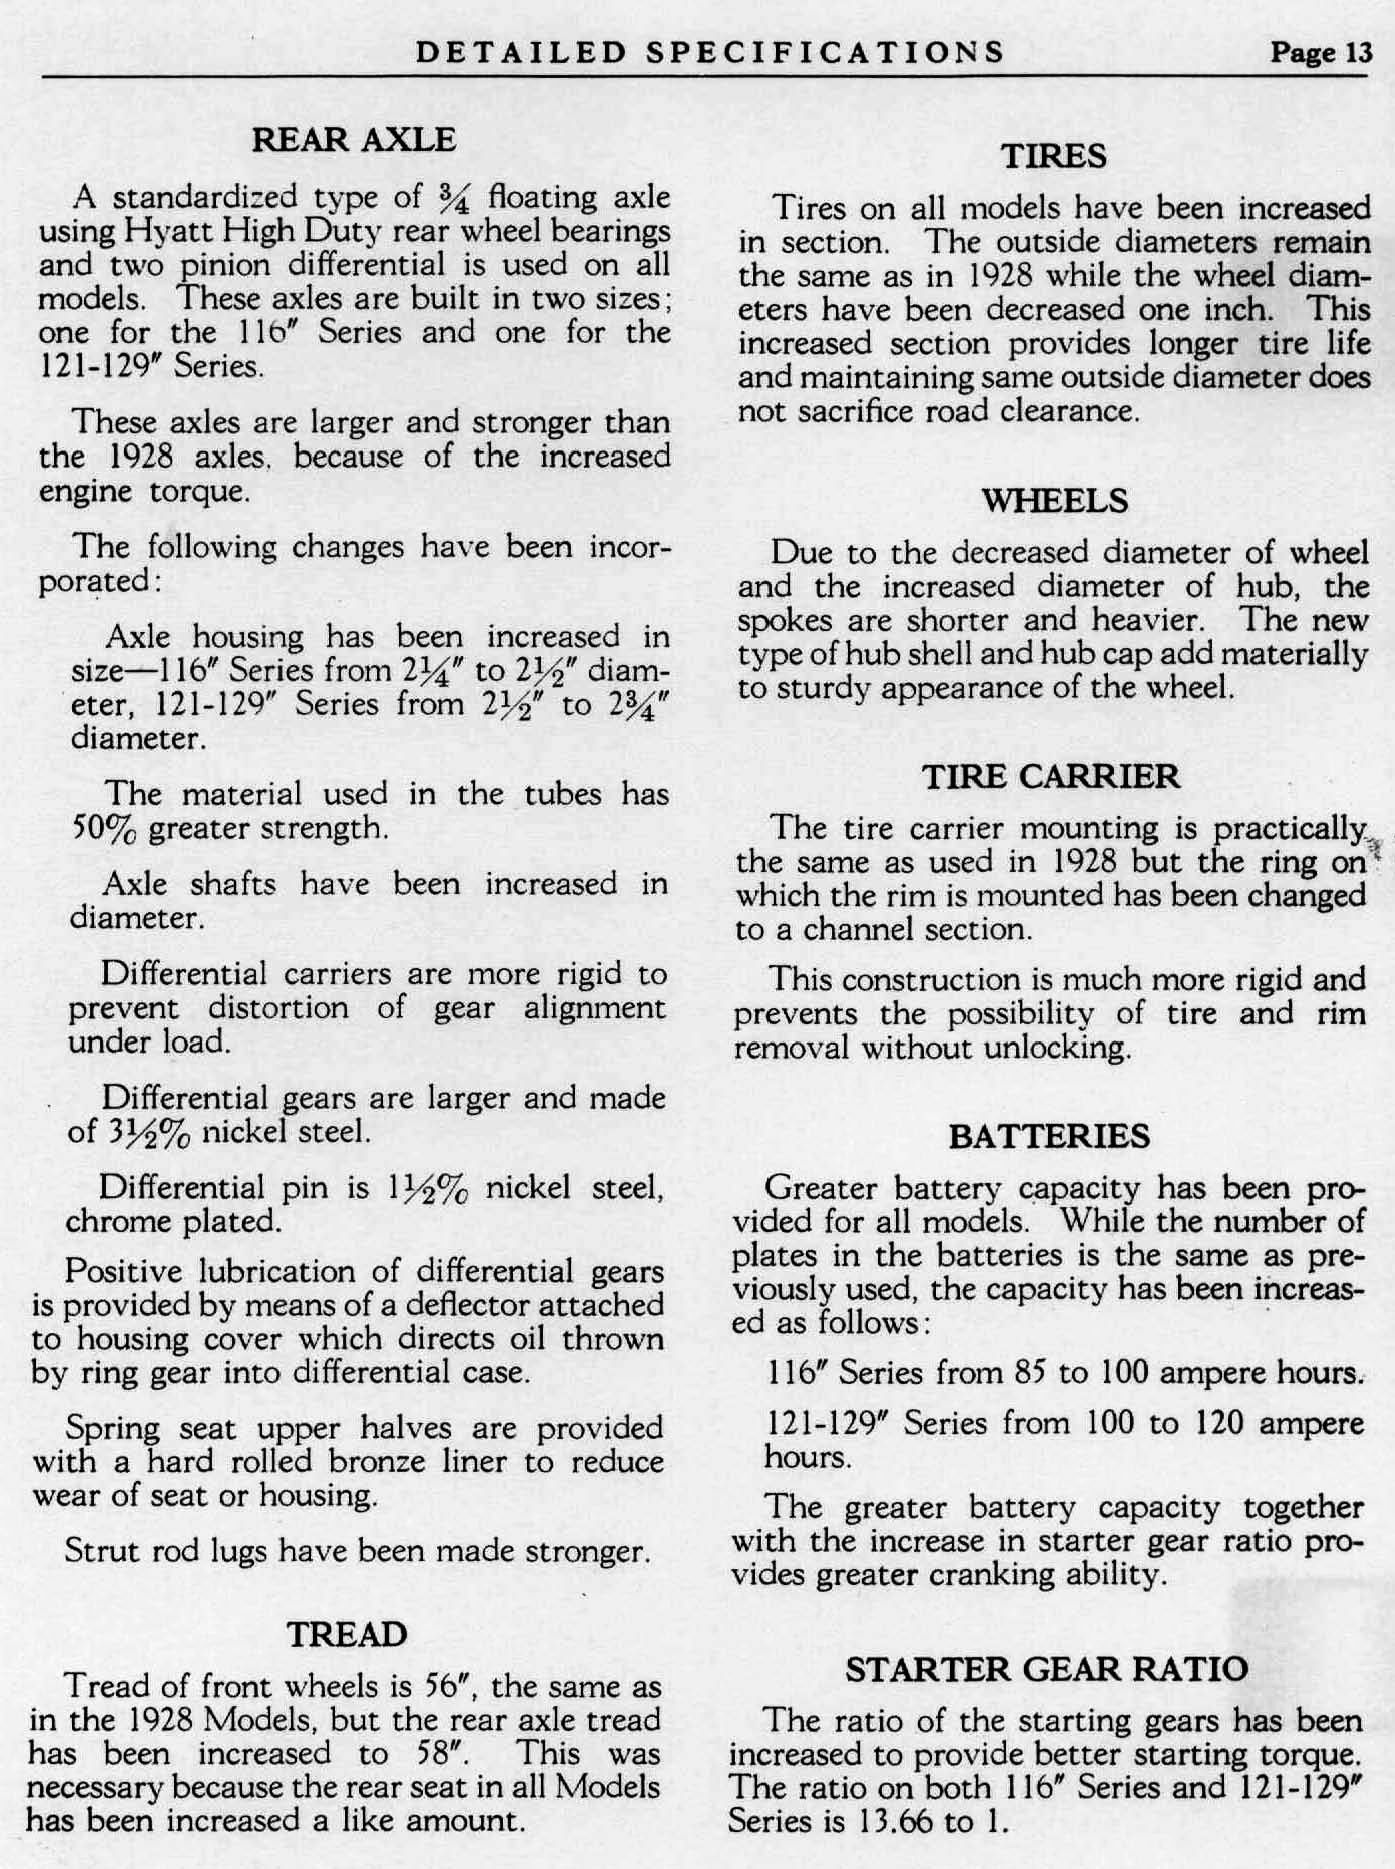 1929 Buick Detailed Specs-13